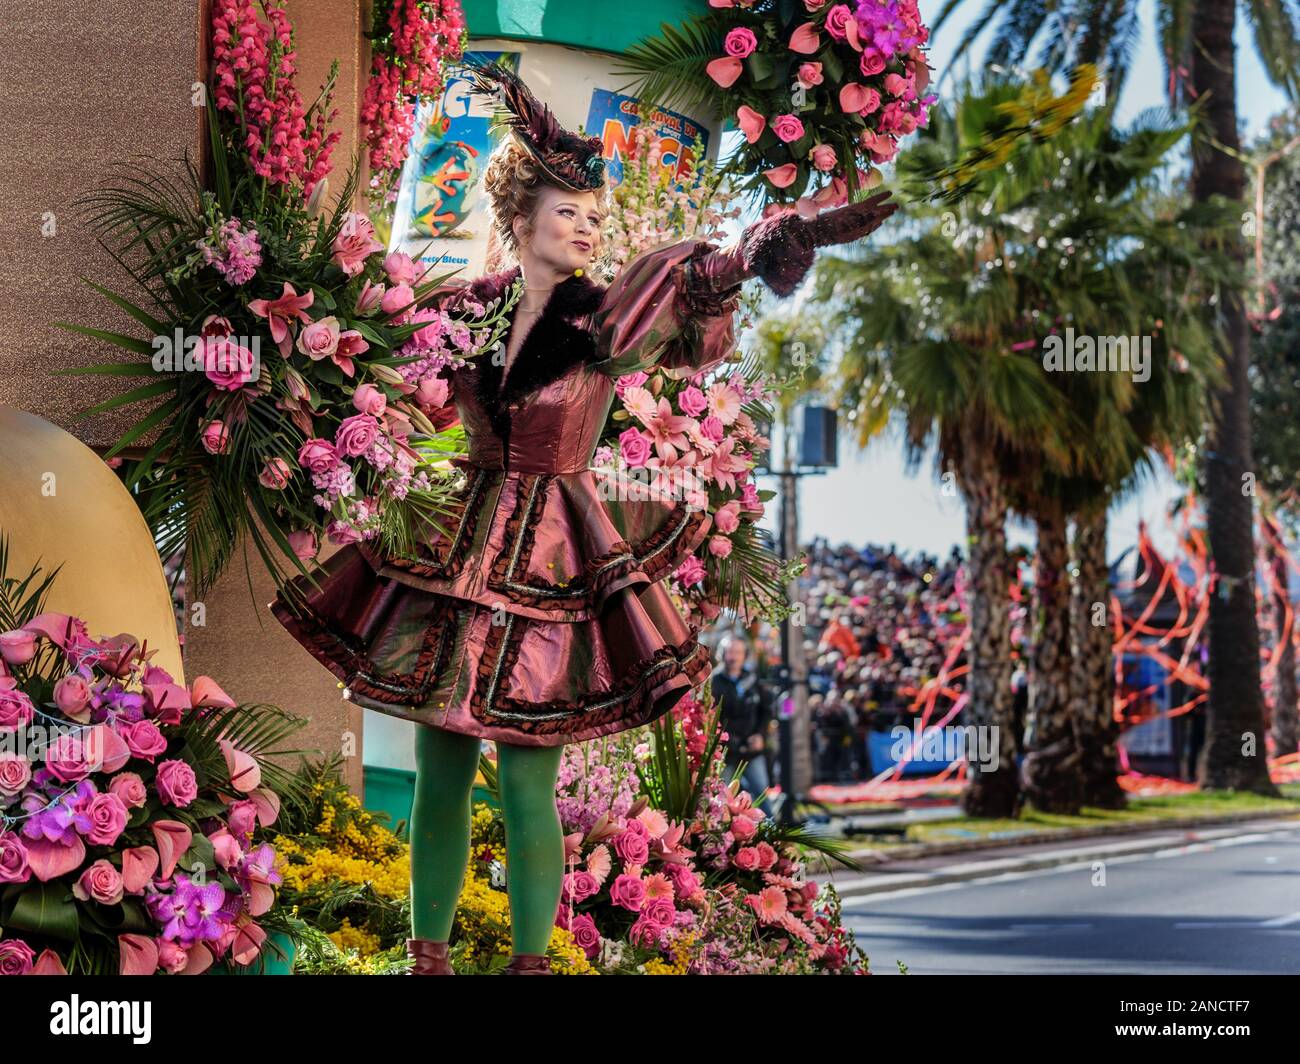 performer throwing flowers from float to the crowd at the Flower Parade, Nice Carnival, French Riviera, Cote d'Azur, France. Stock Photo